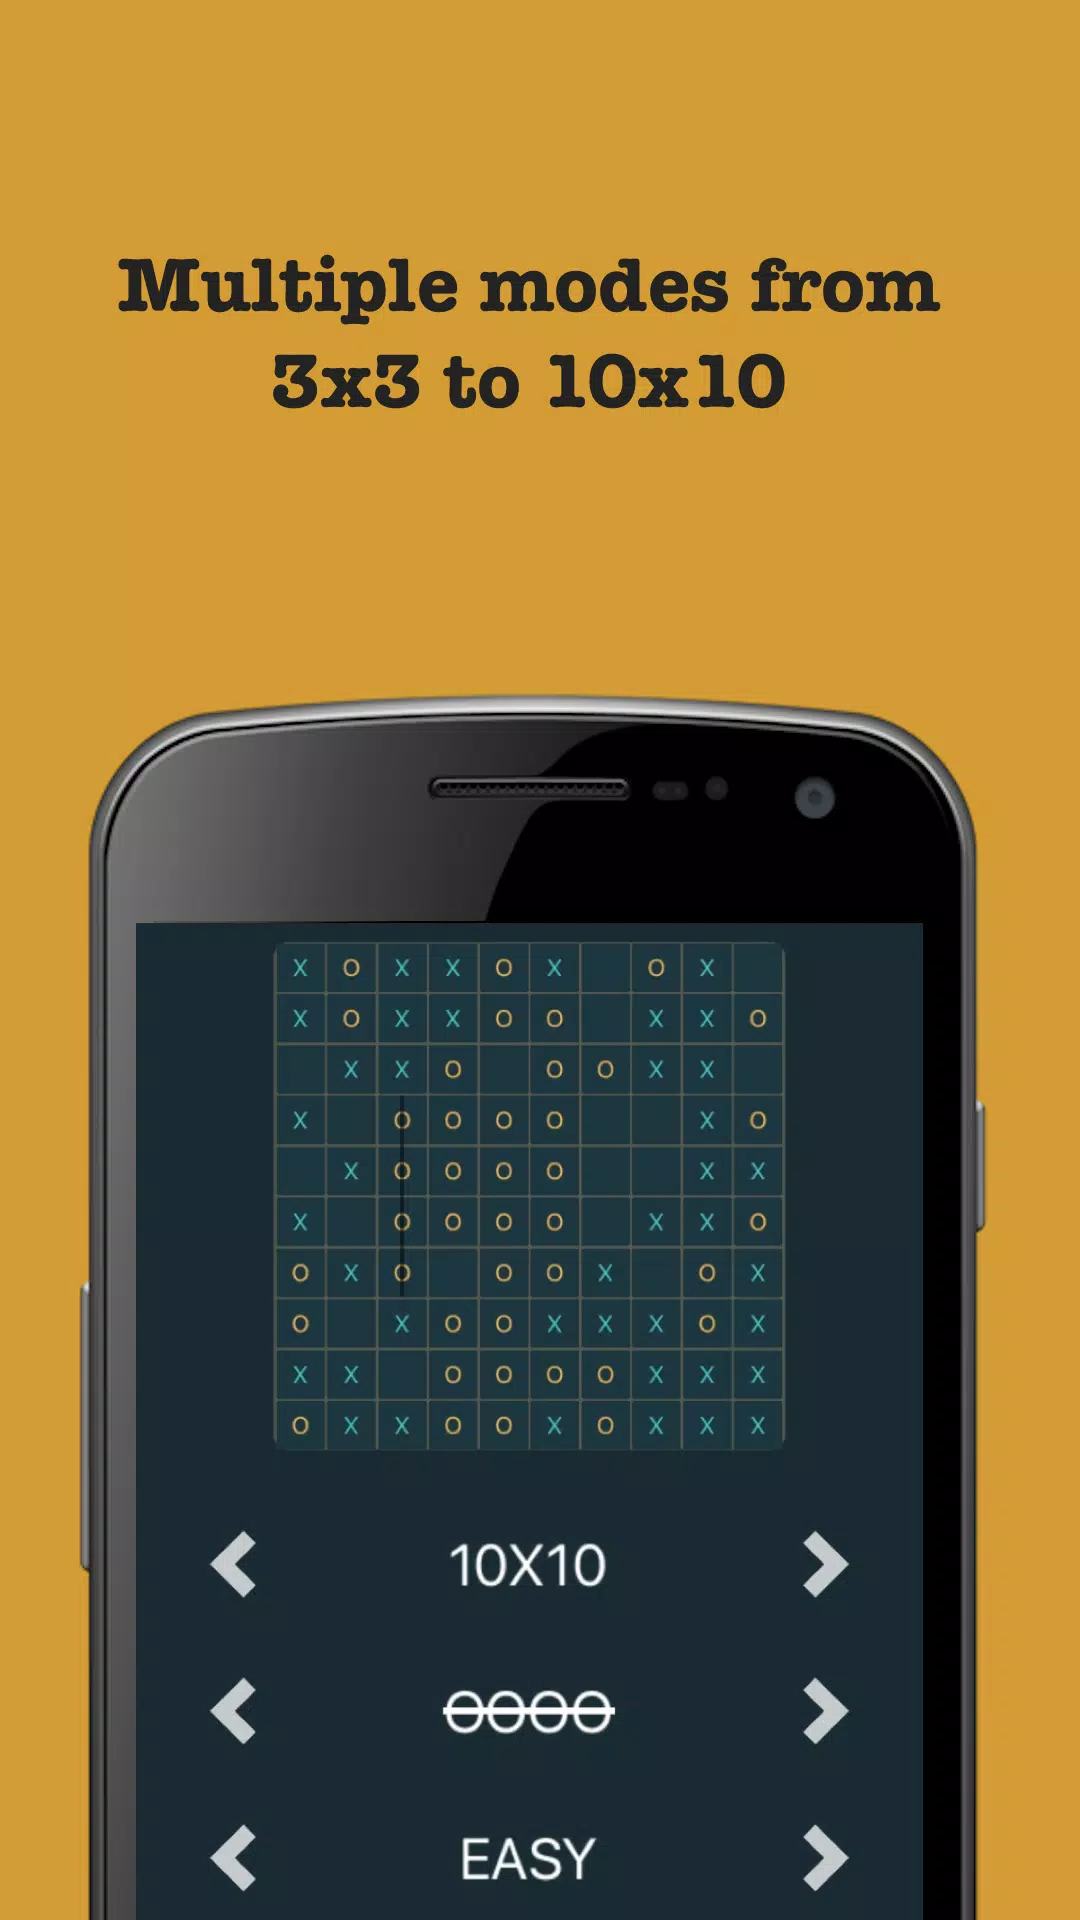 Tic Tac Toe 2 Player XO Game - Apps on Google Play